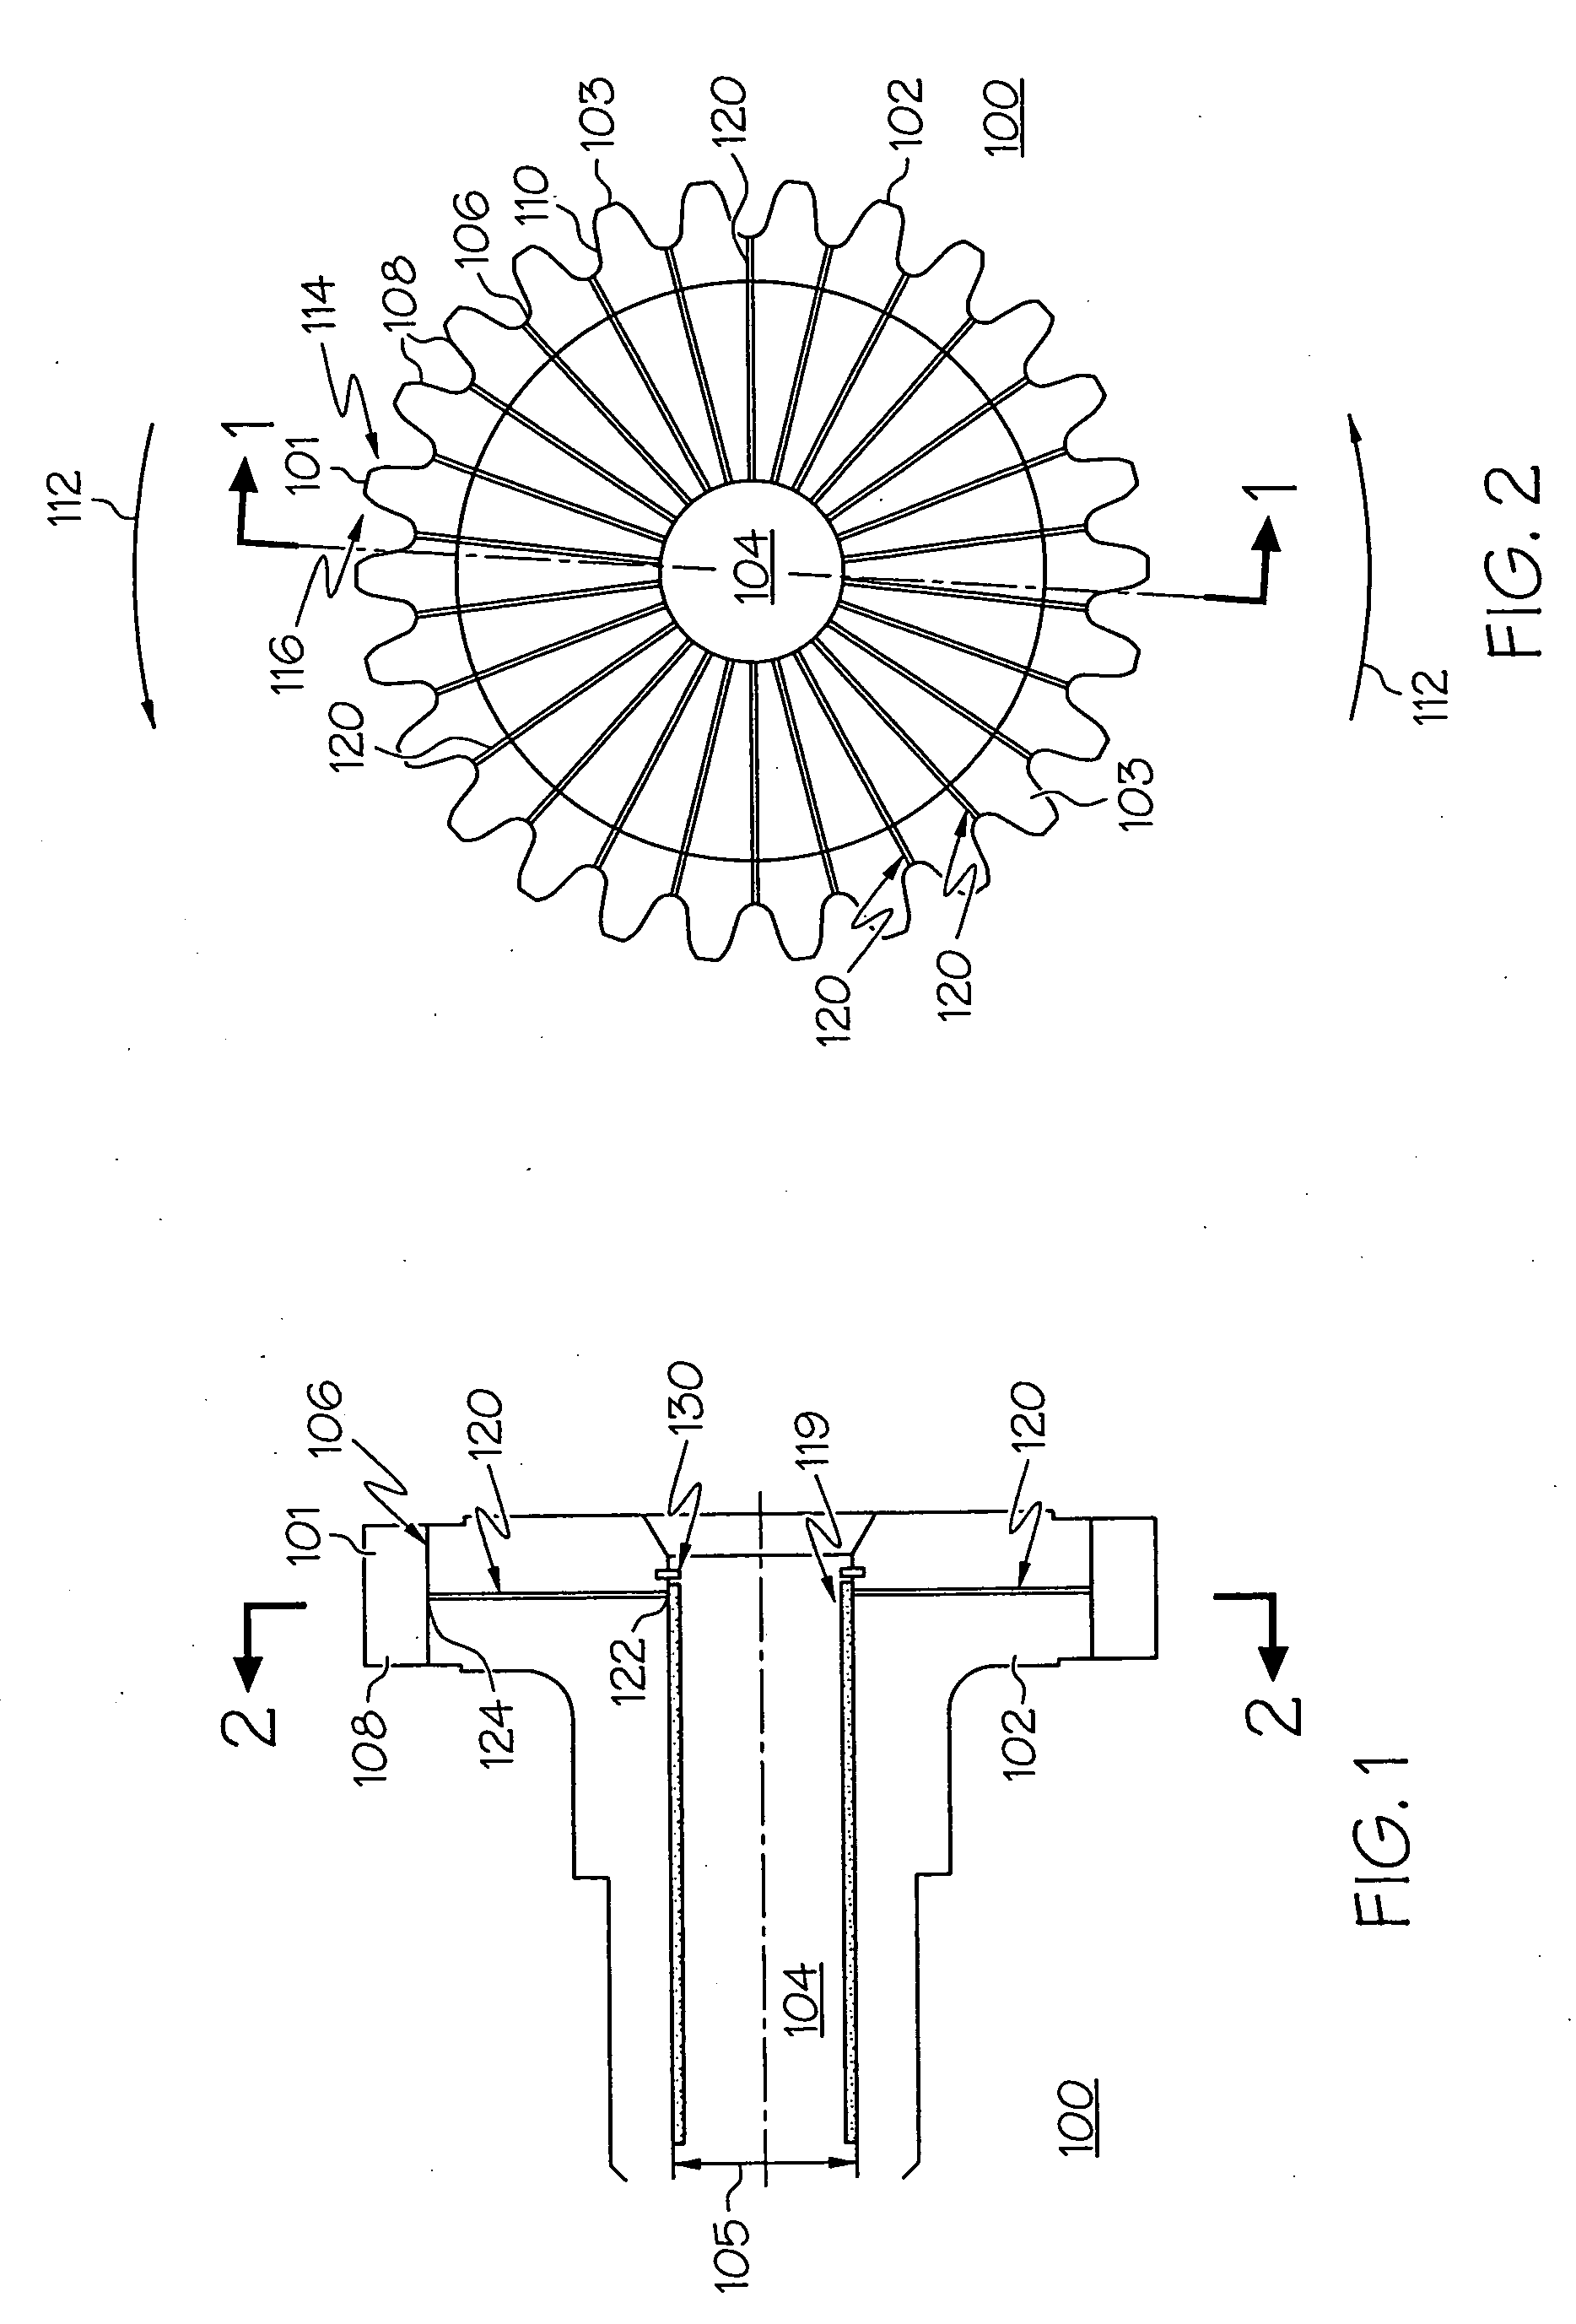 Positive lubrication of a meshing gear